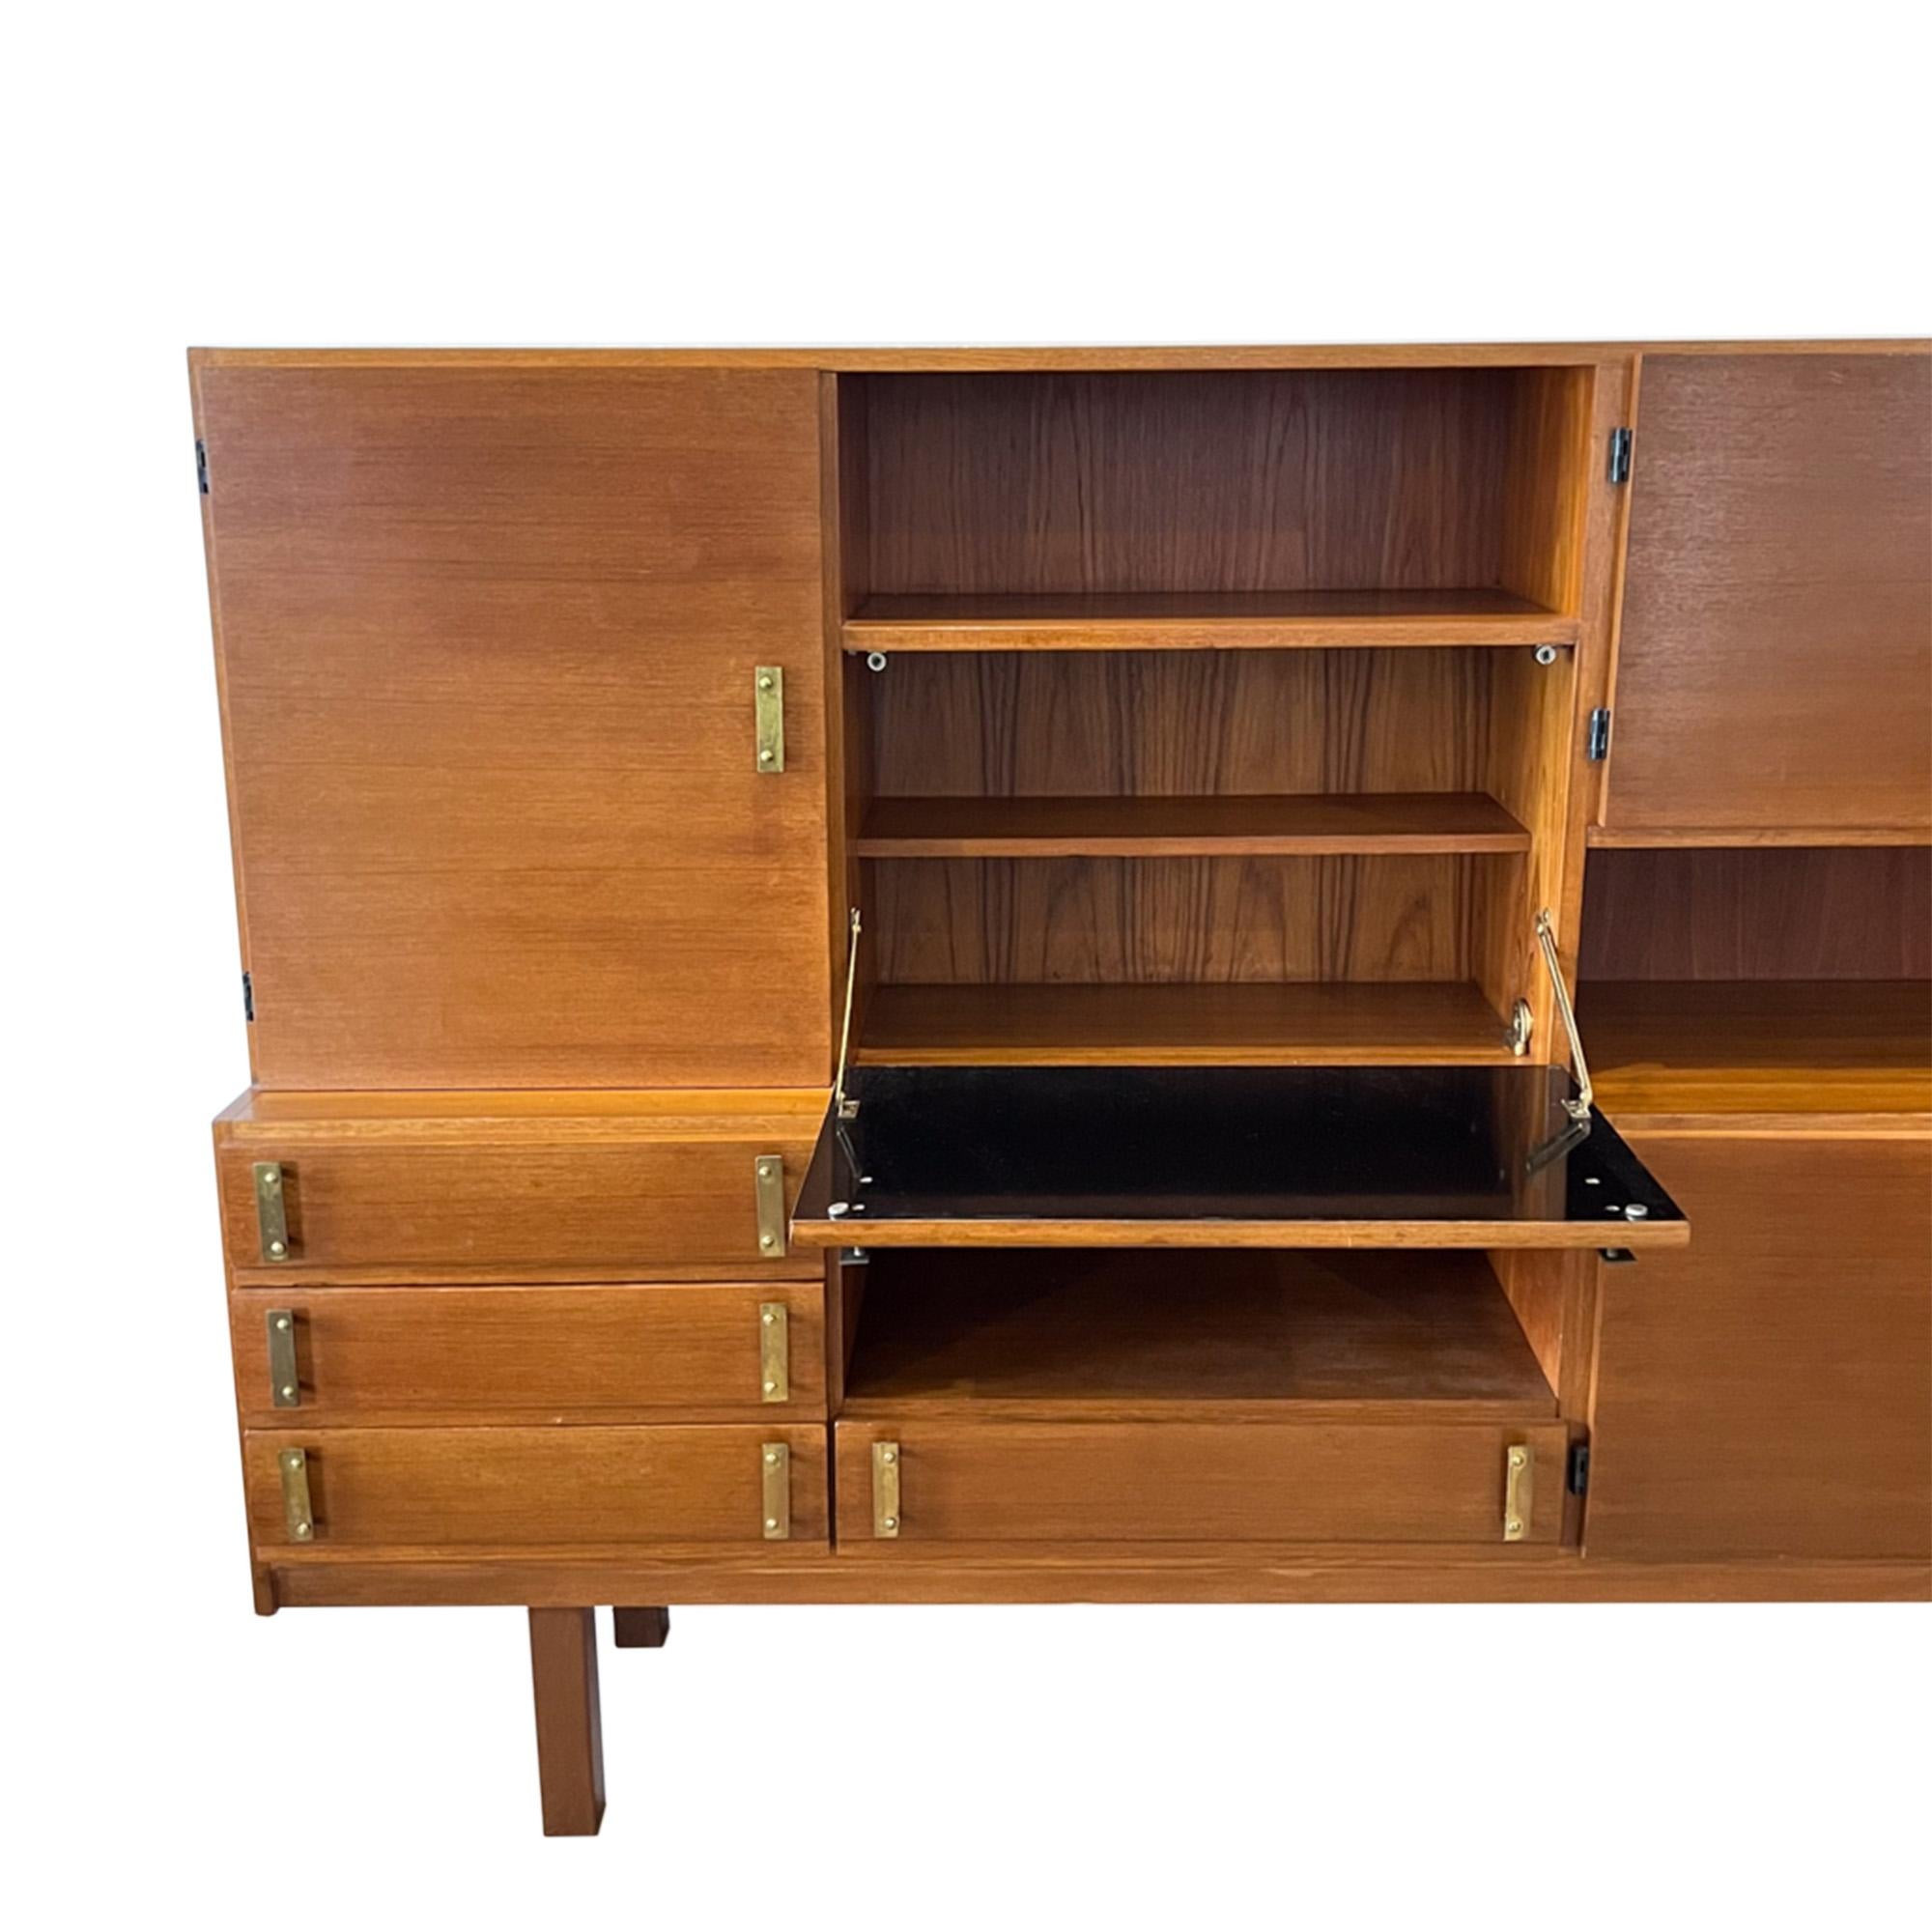 This impressive piece was made in France in the 1960s.

A great combination of storage and display space, including a pull down home bar. Please have a look at all our pictures to take a look. 

An attractive design with the decorative original